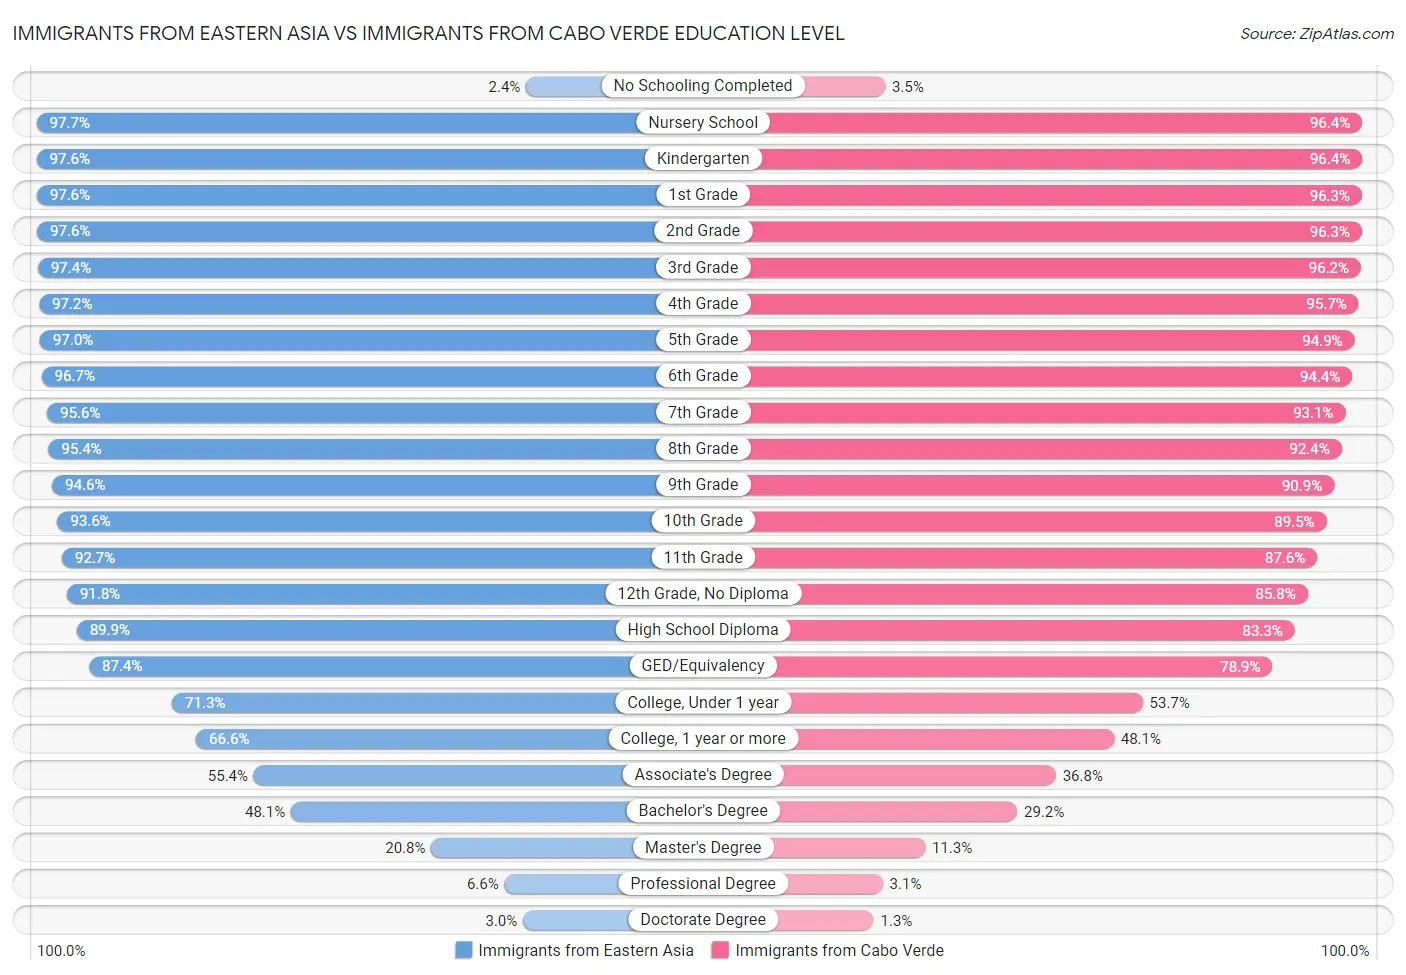 Immigrants from Eastern Asia vs Immigrants from Cabo Verde Education Level